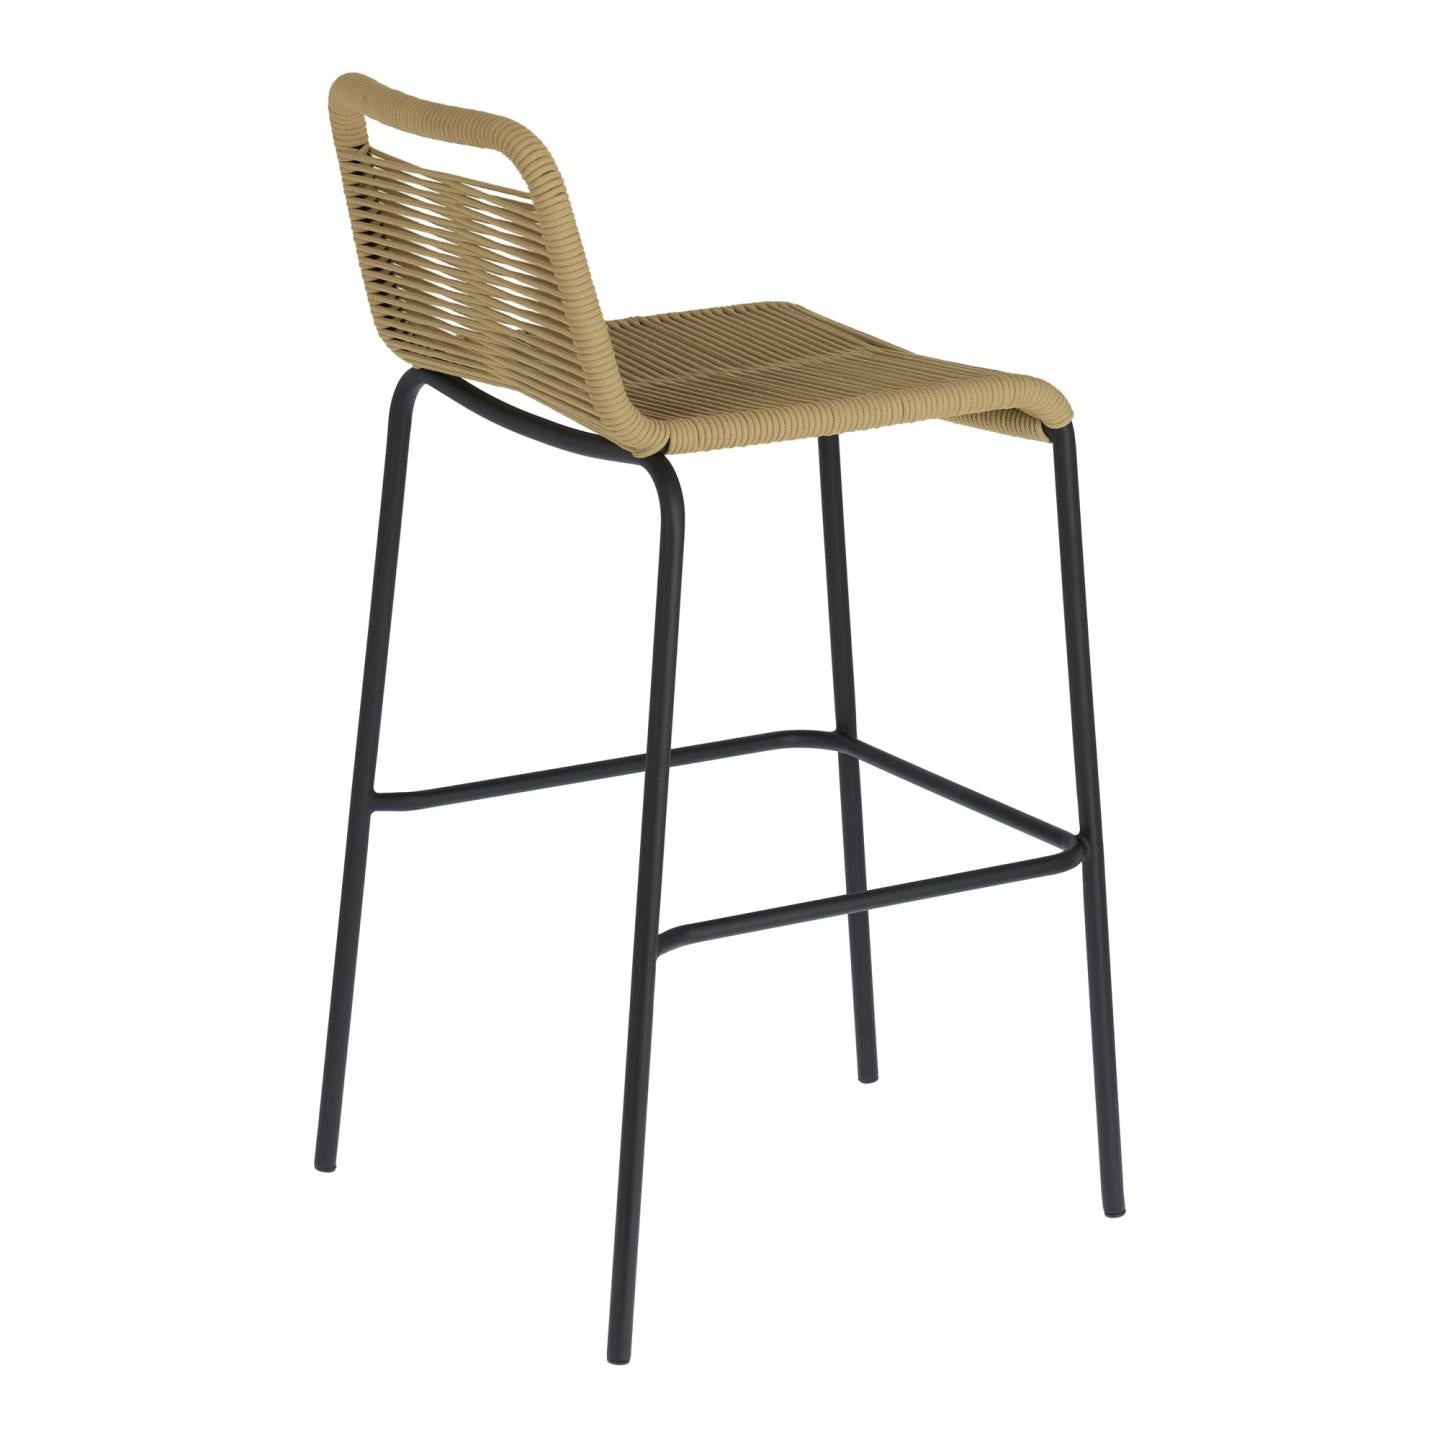 Lambton stackable stool in brown rope and black finish steel 74 cm